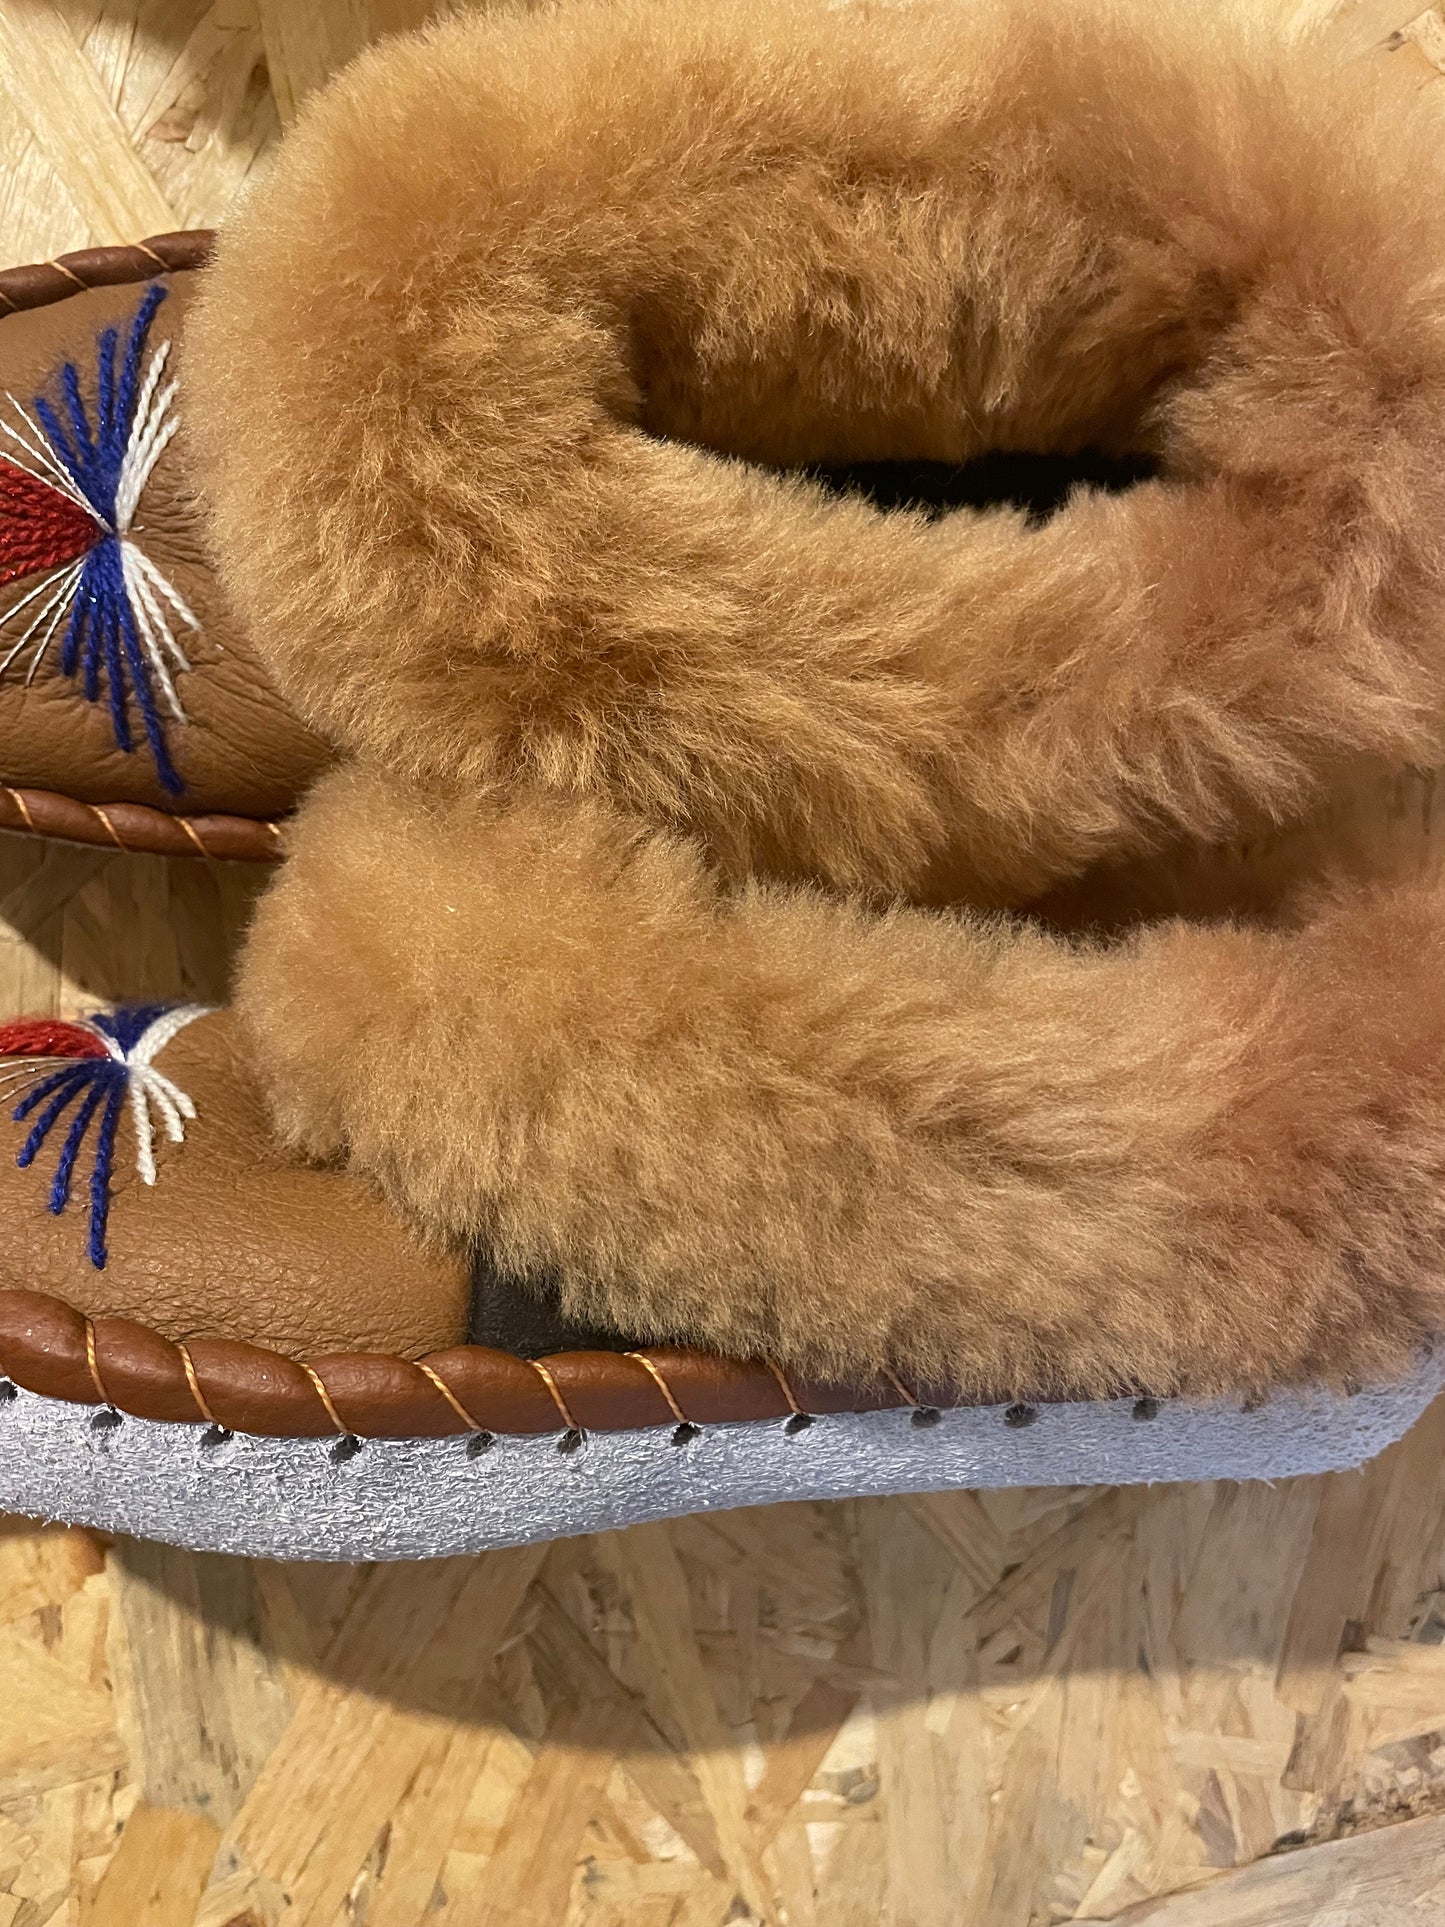 Polish Artisan Embroidered Slippers